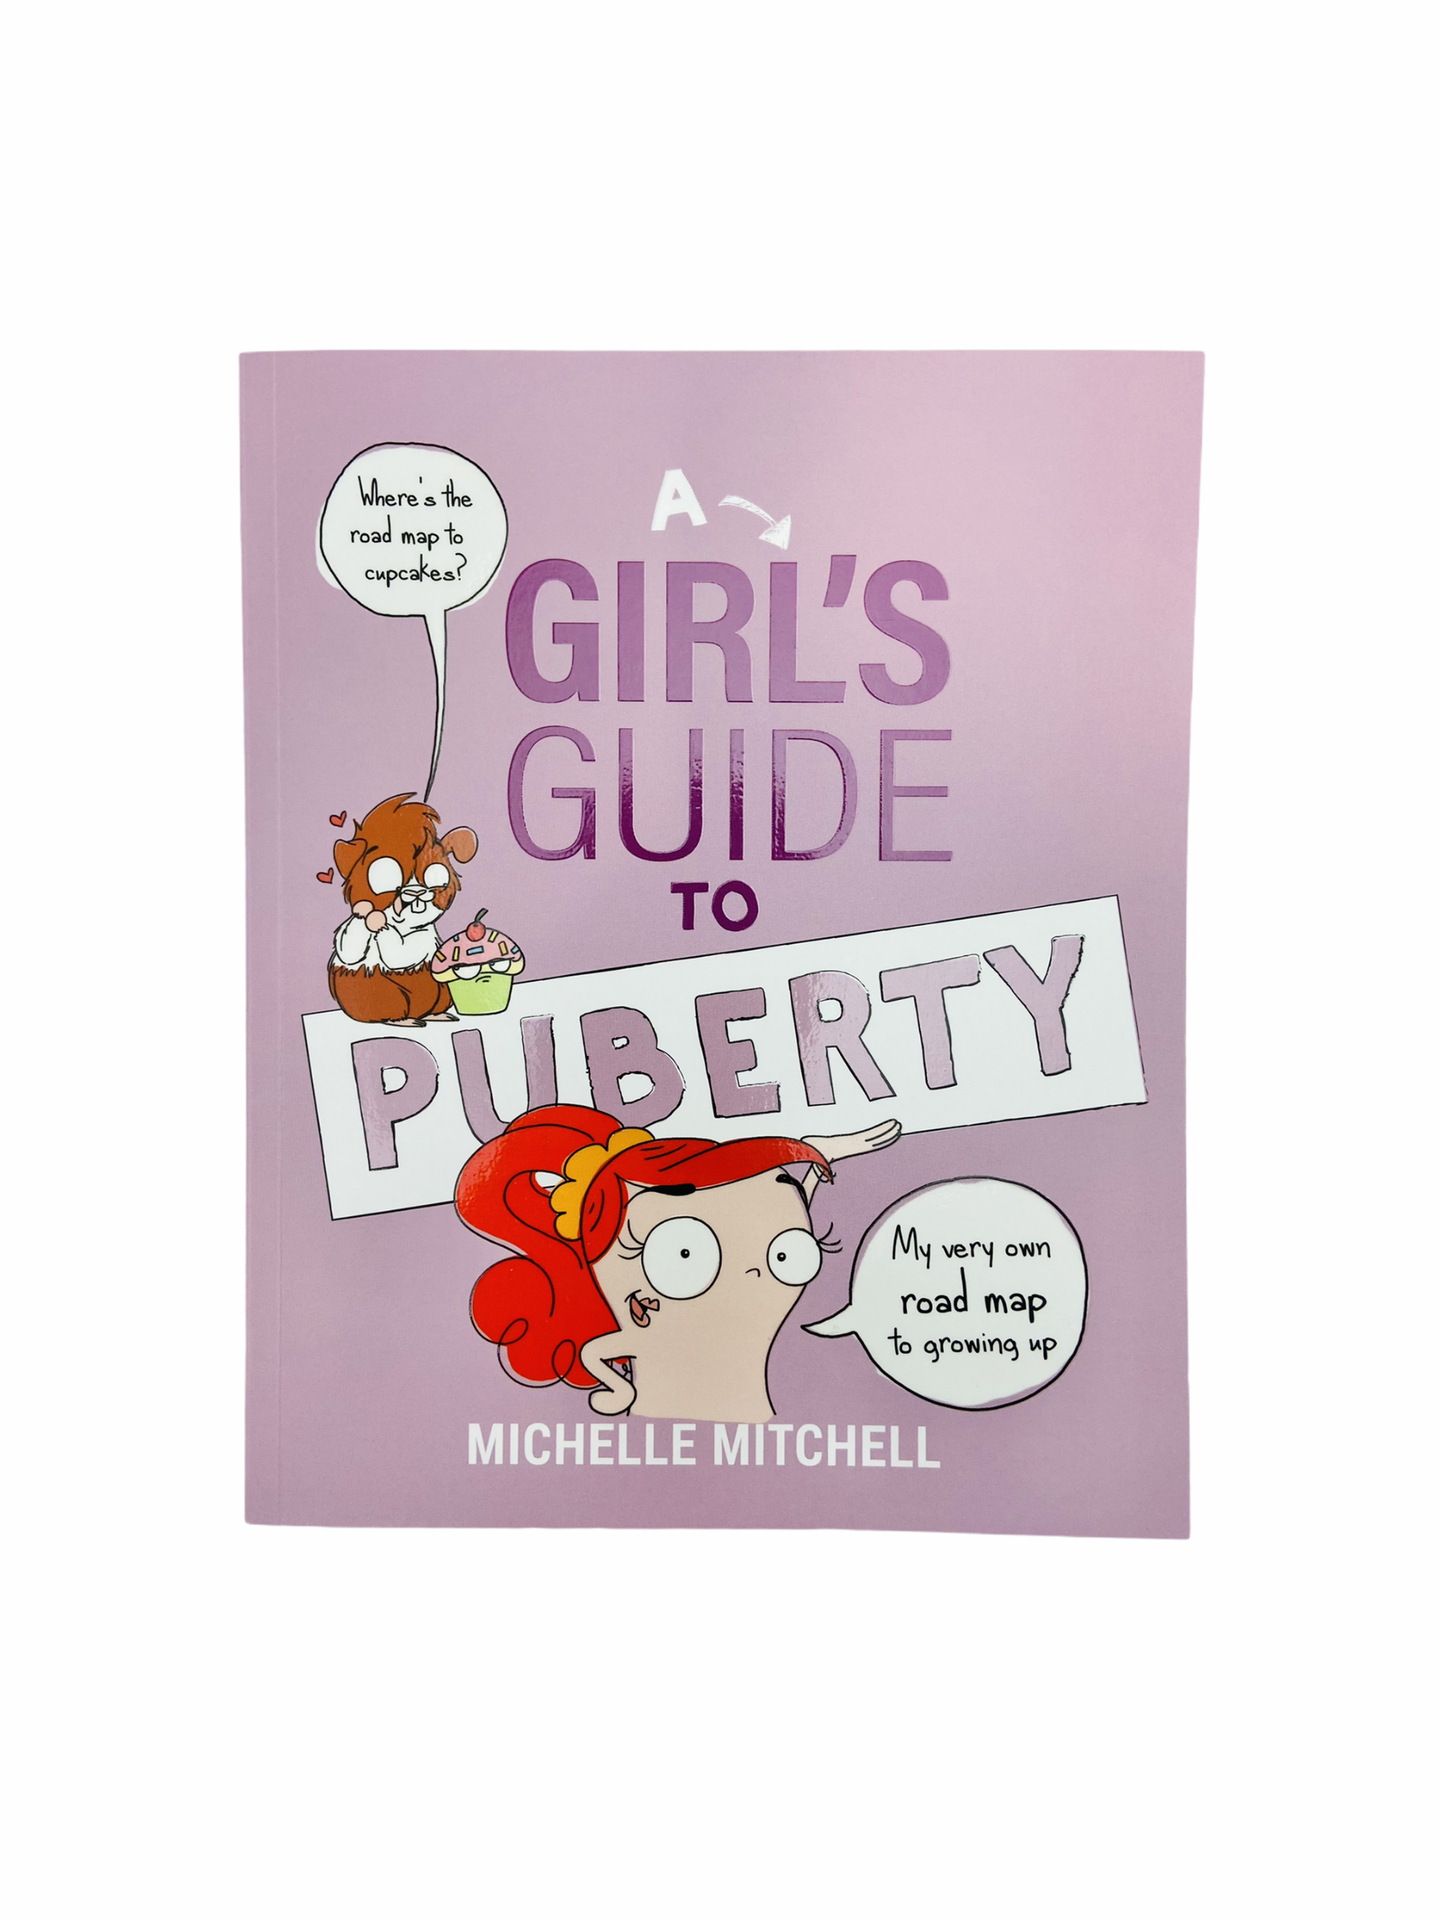 Front cover of A Girl's Guide to Puberty book with red haired character featuring speech bubbles